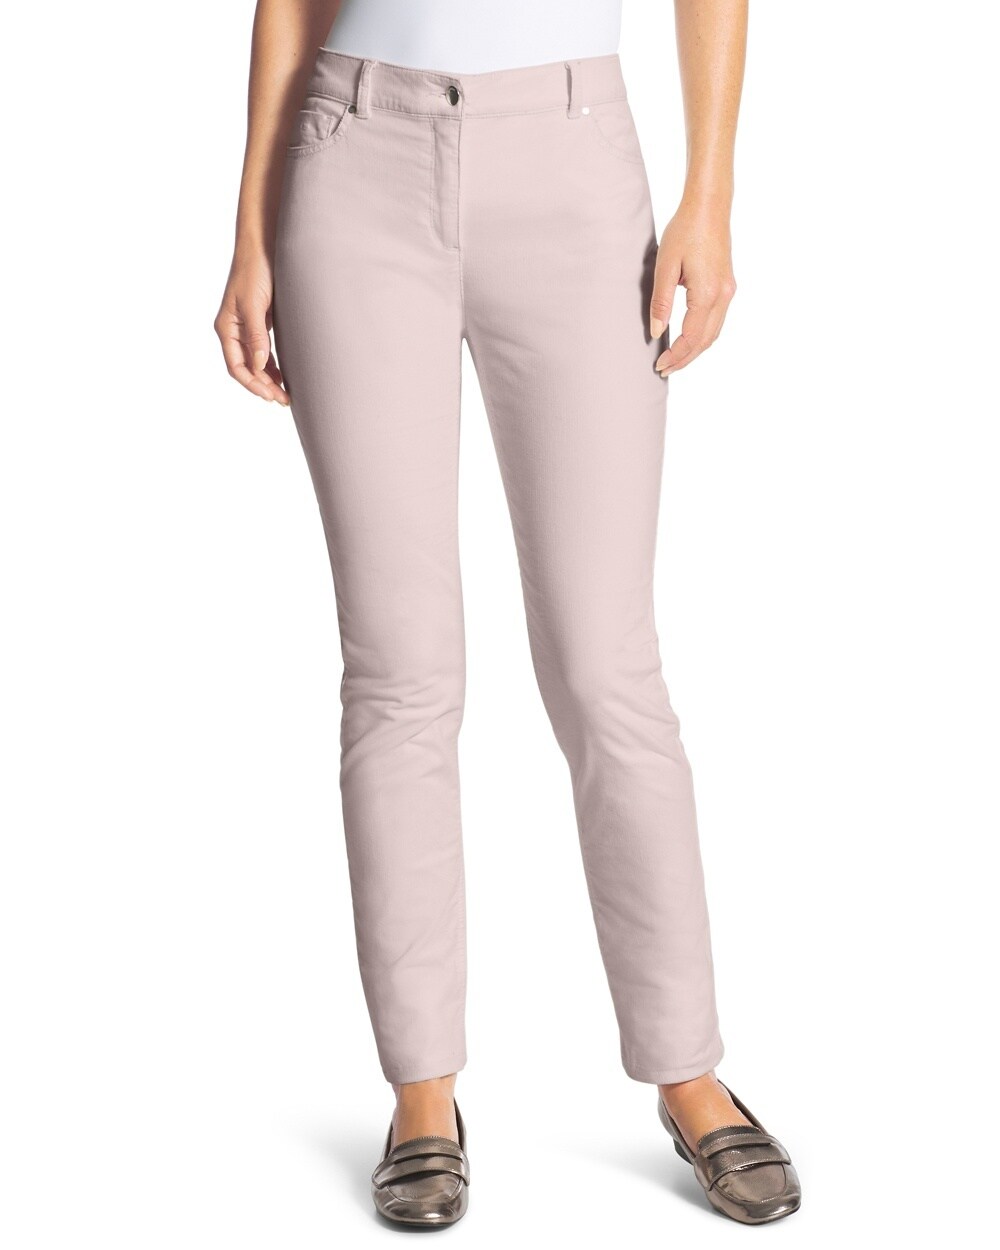 Slim Corduroy Pants in Soft Orchid